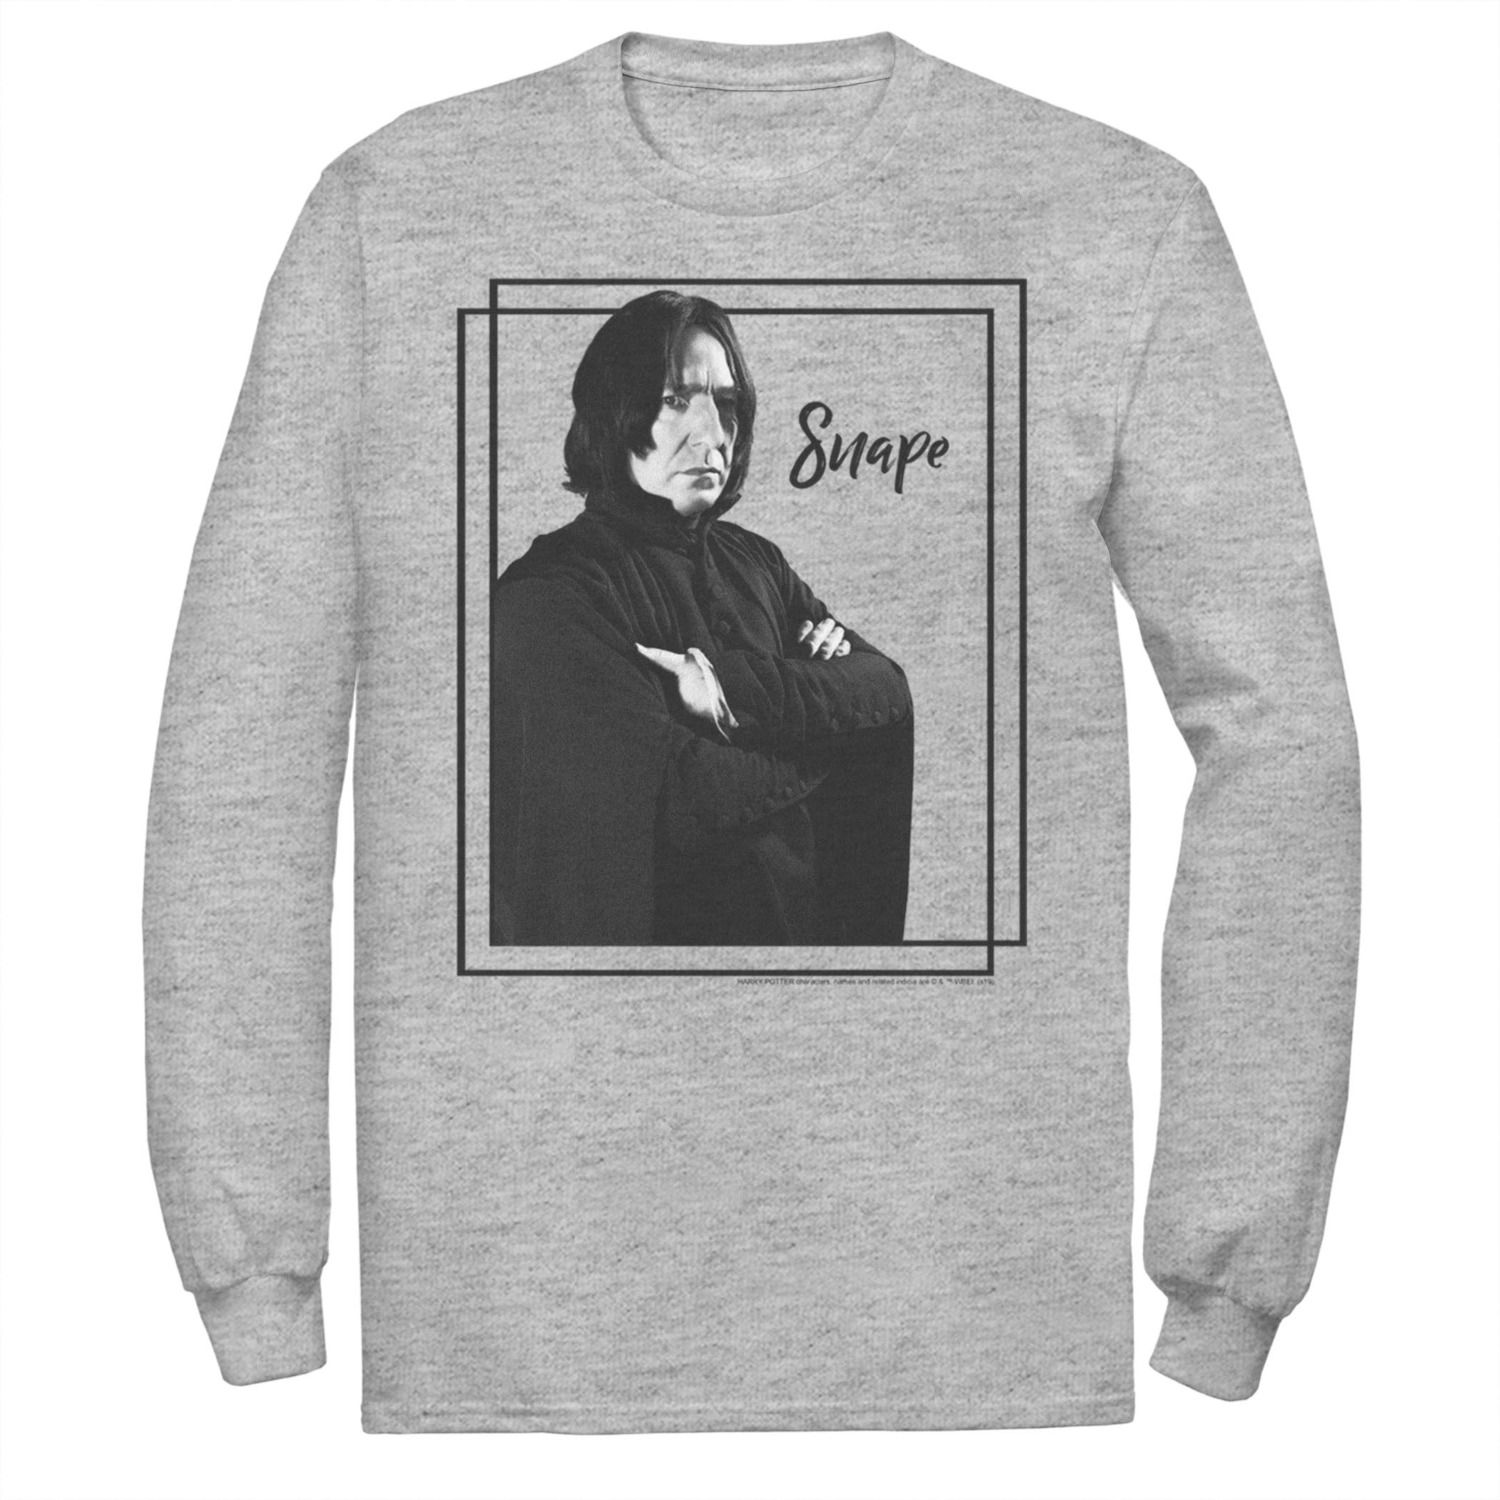 Image for Harry Potter Men's Snape Simple Framed Portrait Long Sleeve Graphic Tee at Kohl's.